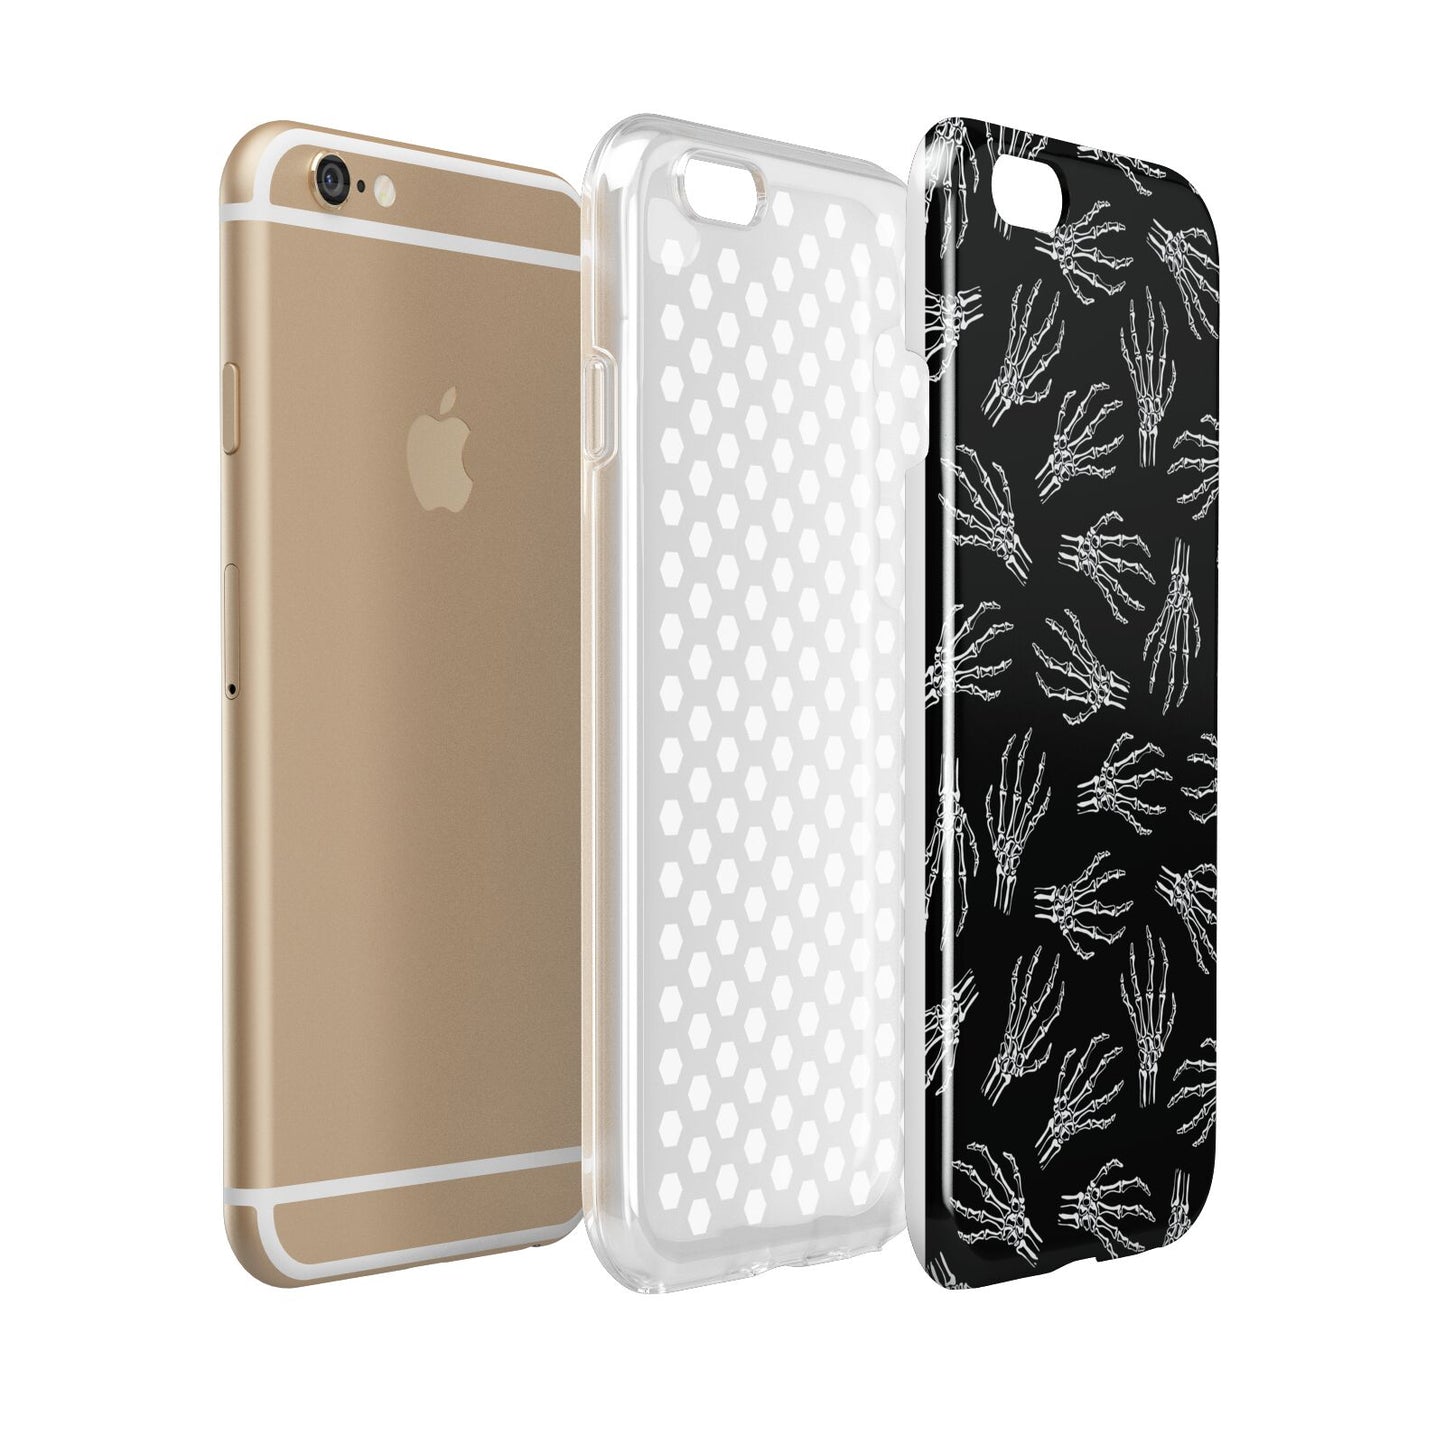 Skeleton Hands Apple iPhone 6 3D Tough Case Expanded view